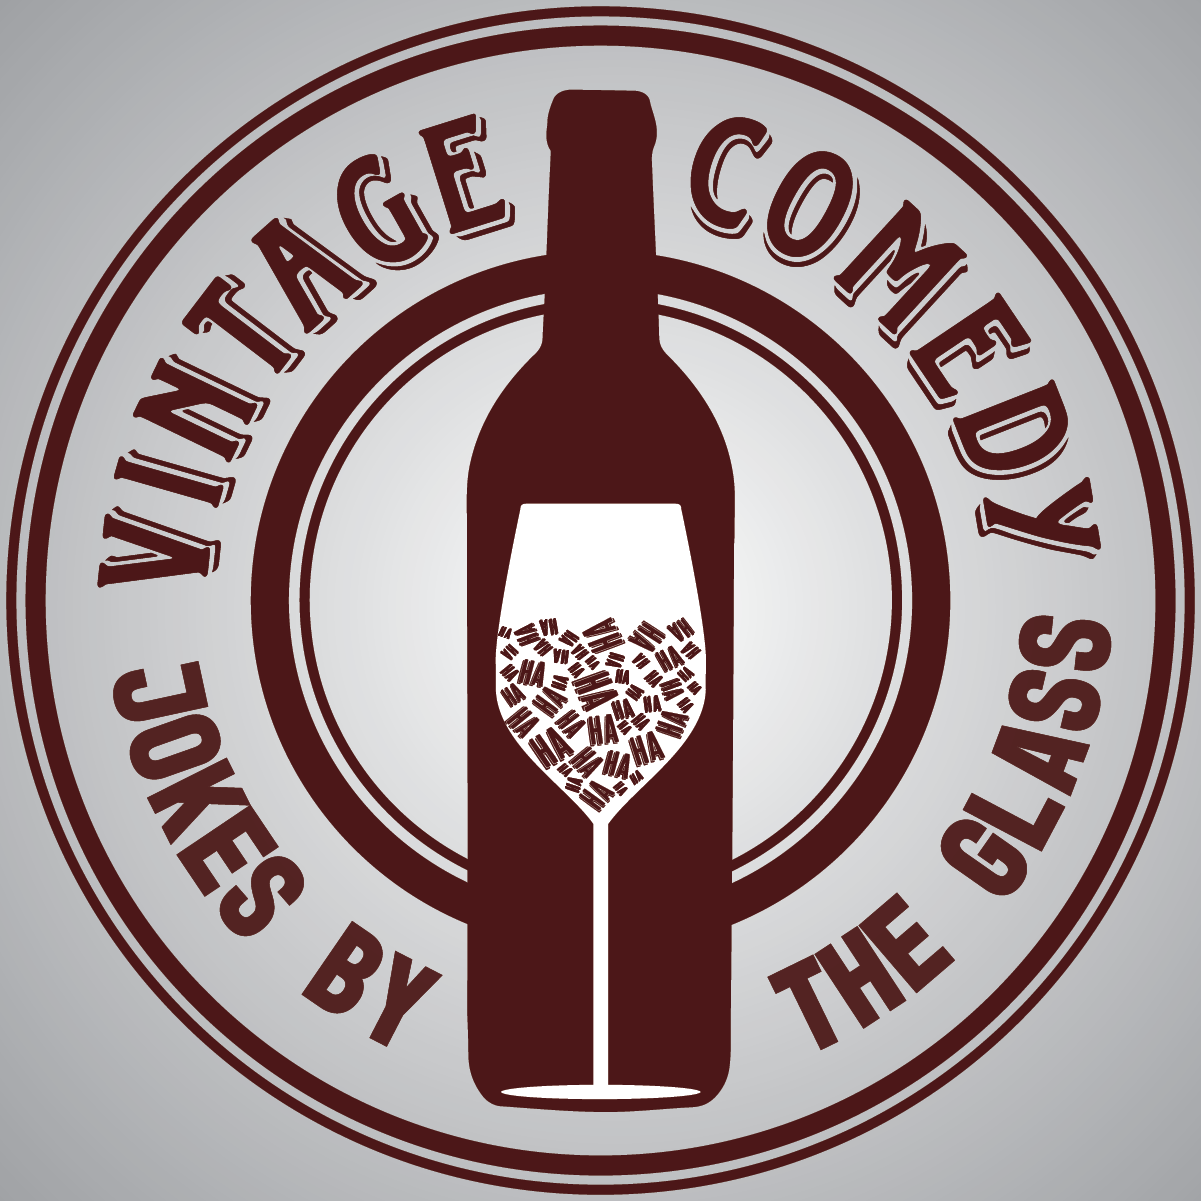 Vintage Comedy • Funny Enough to Pair With Any Audience